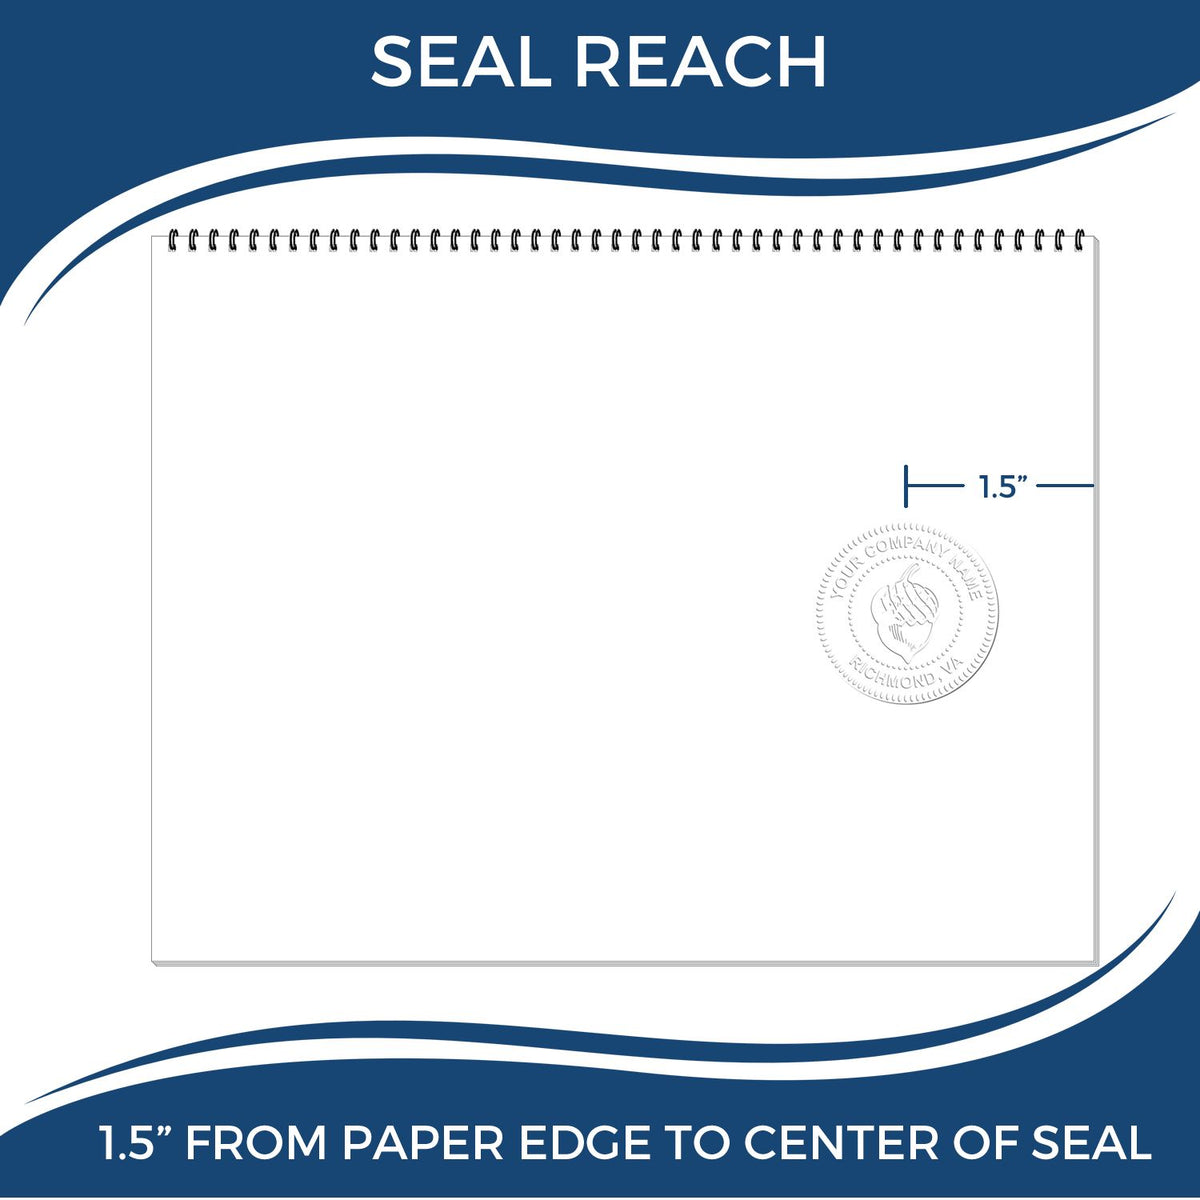 An infographic showing the seal reach which is represented by a ruler and a miniature seal image of the Gift Arizona Architect Seal